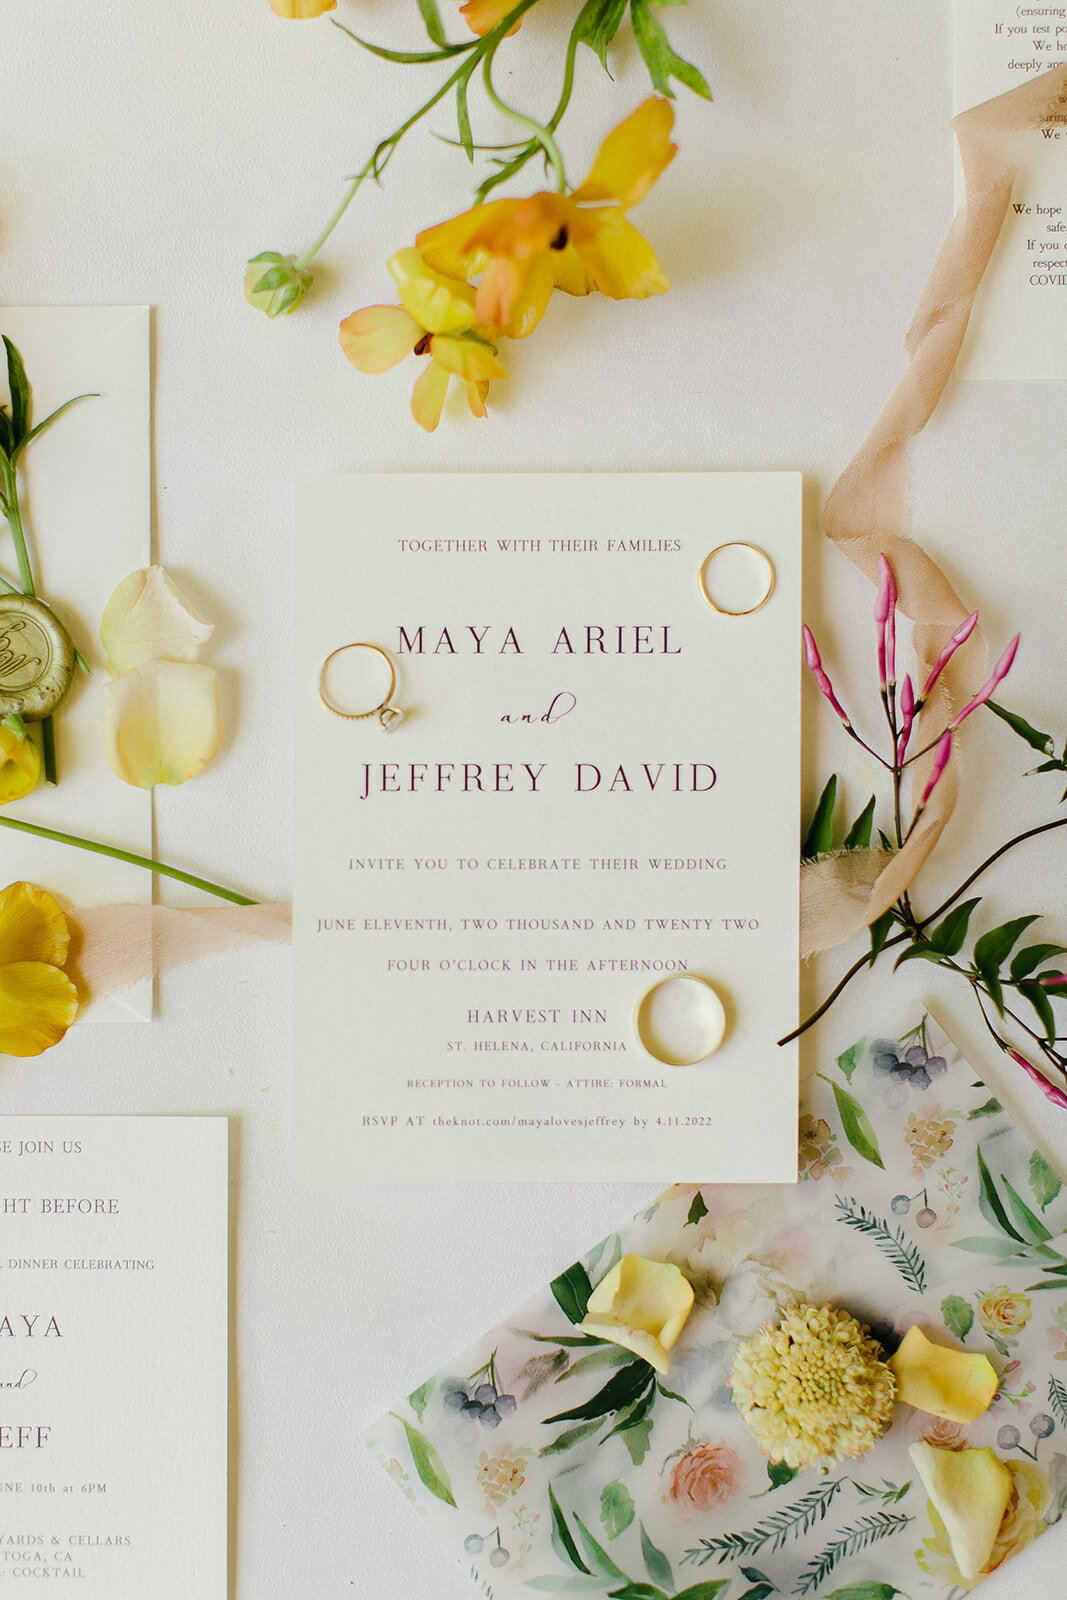 Flat lay photo of invitations for wedding at the Harvest Inn in St. Helena, California